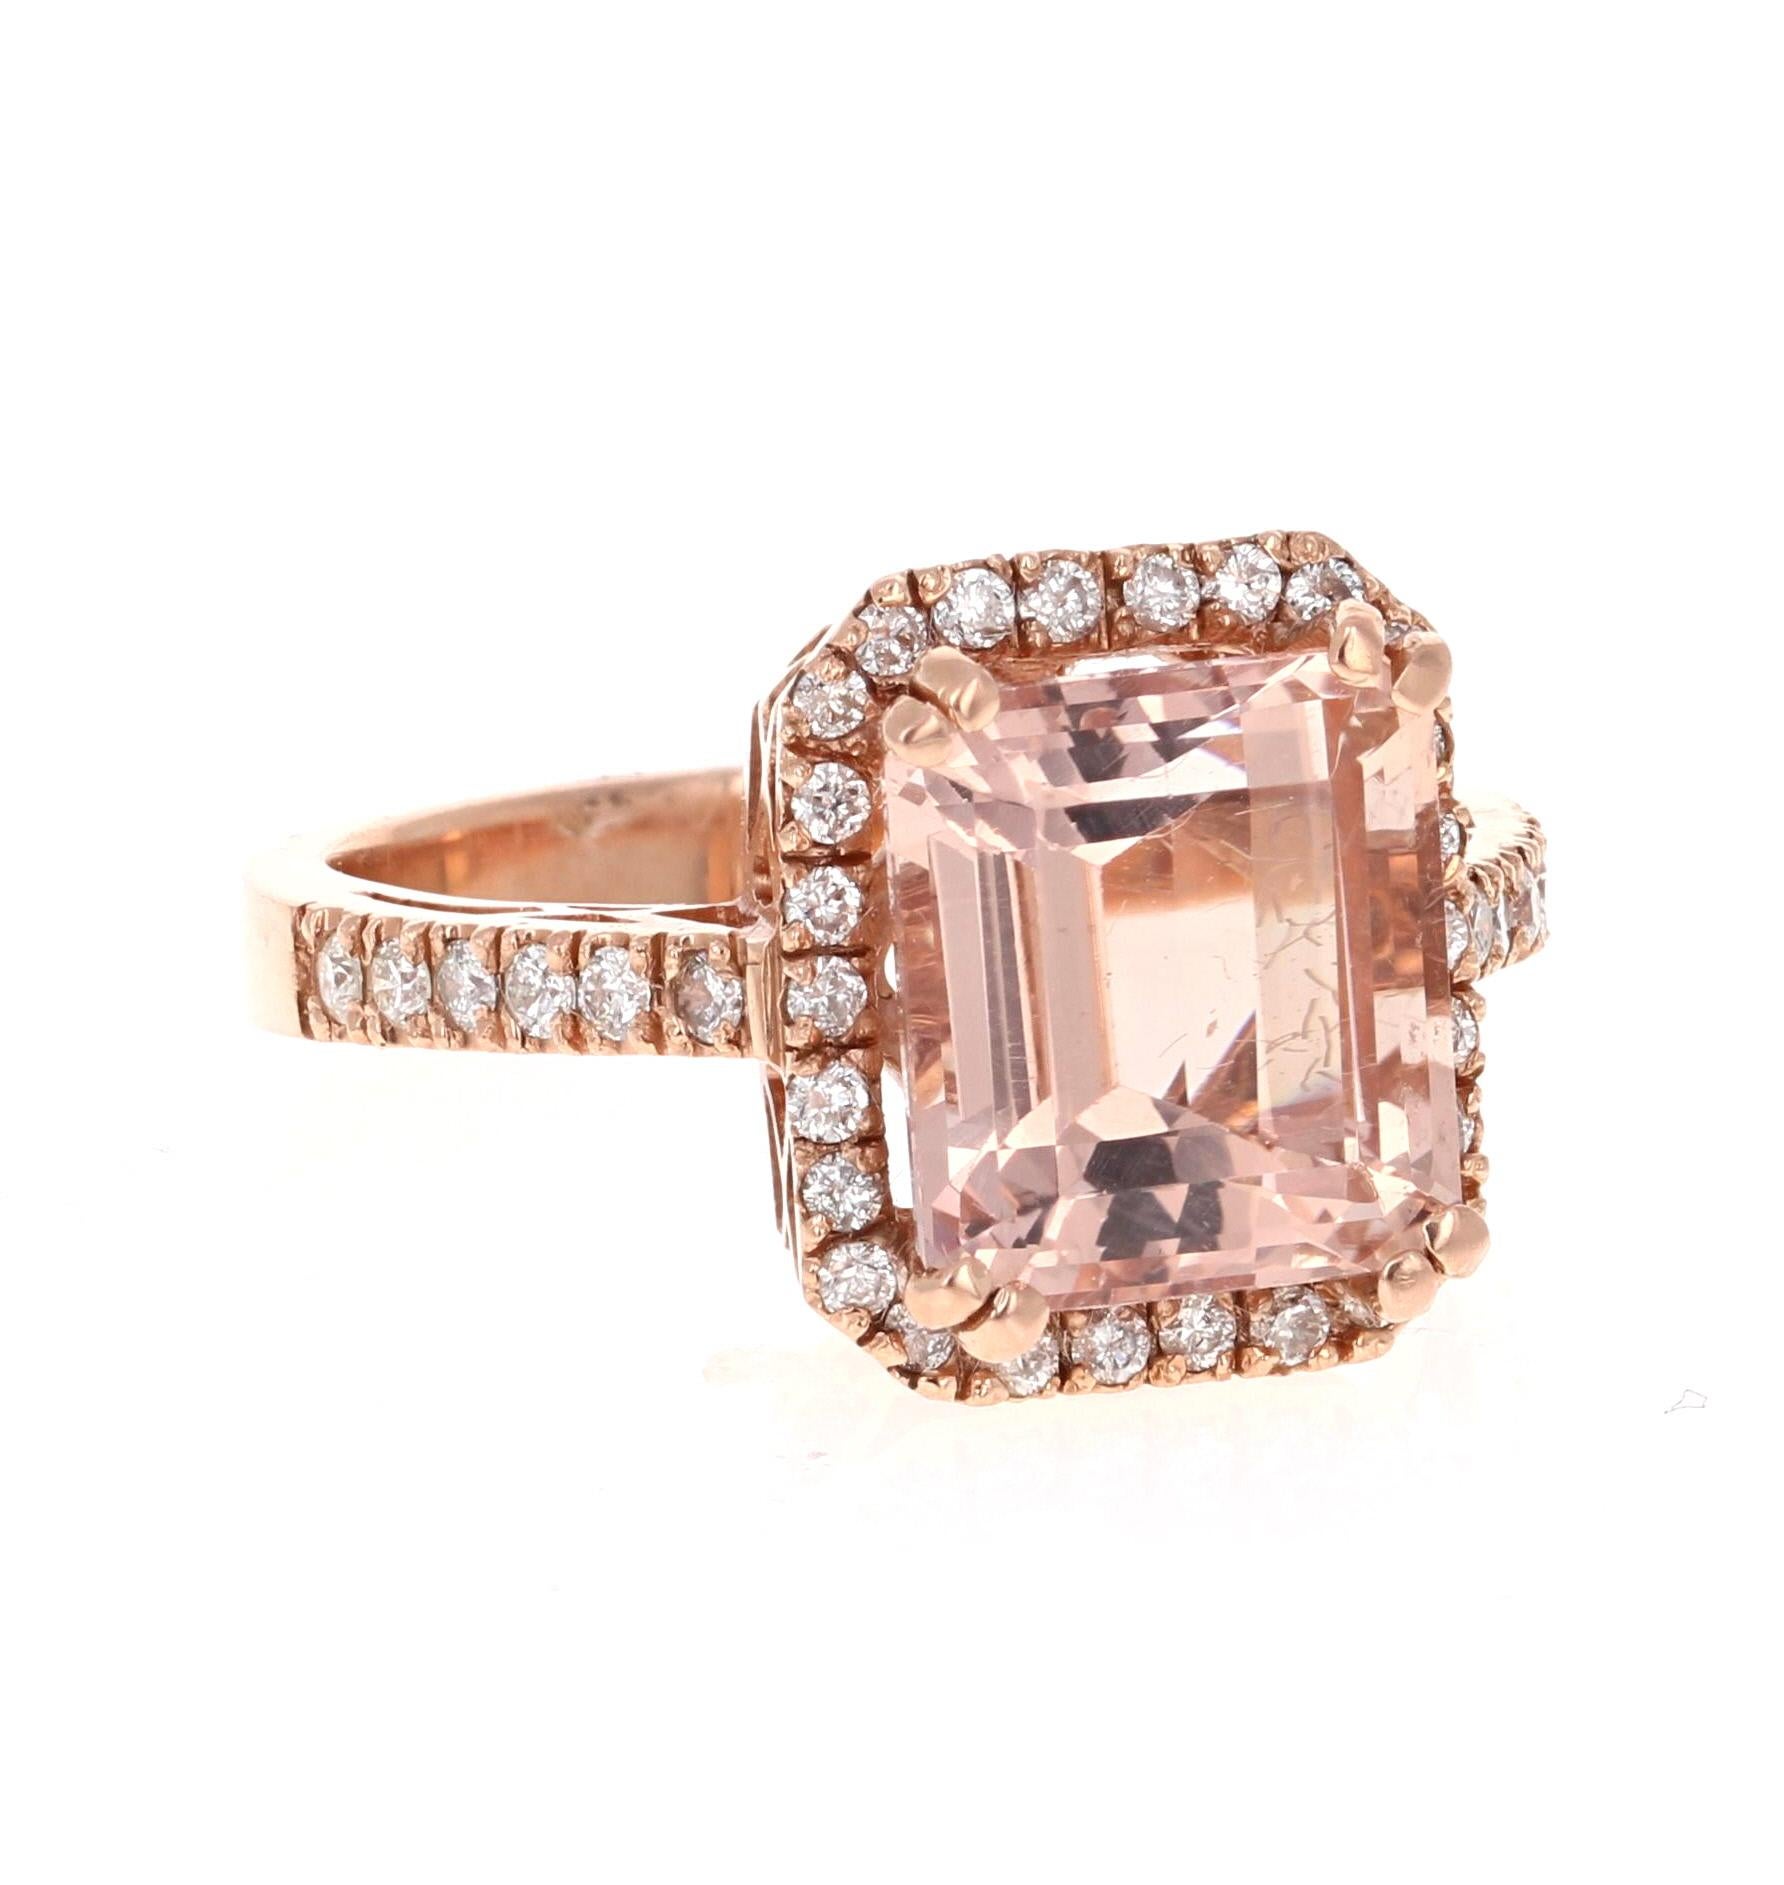 5.34 Carat Morganite Diamond Rose Gold Engagement Ring
A gorgeous ring that can easily be transformed into an engagement ring for that special someone!  

It has a stunning 4.92 Carat Emerald cut Morganite set in the center of the ring and has a